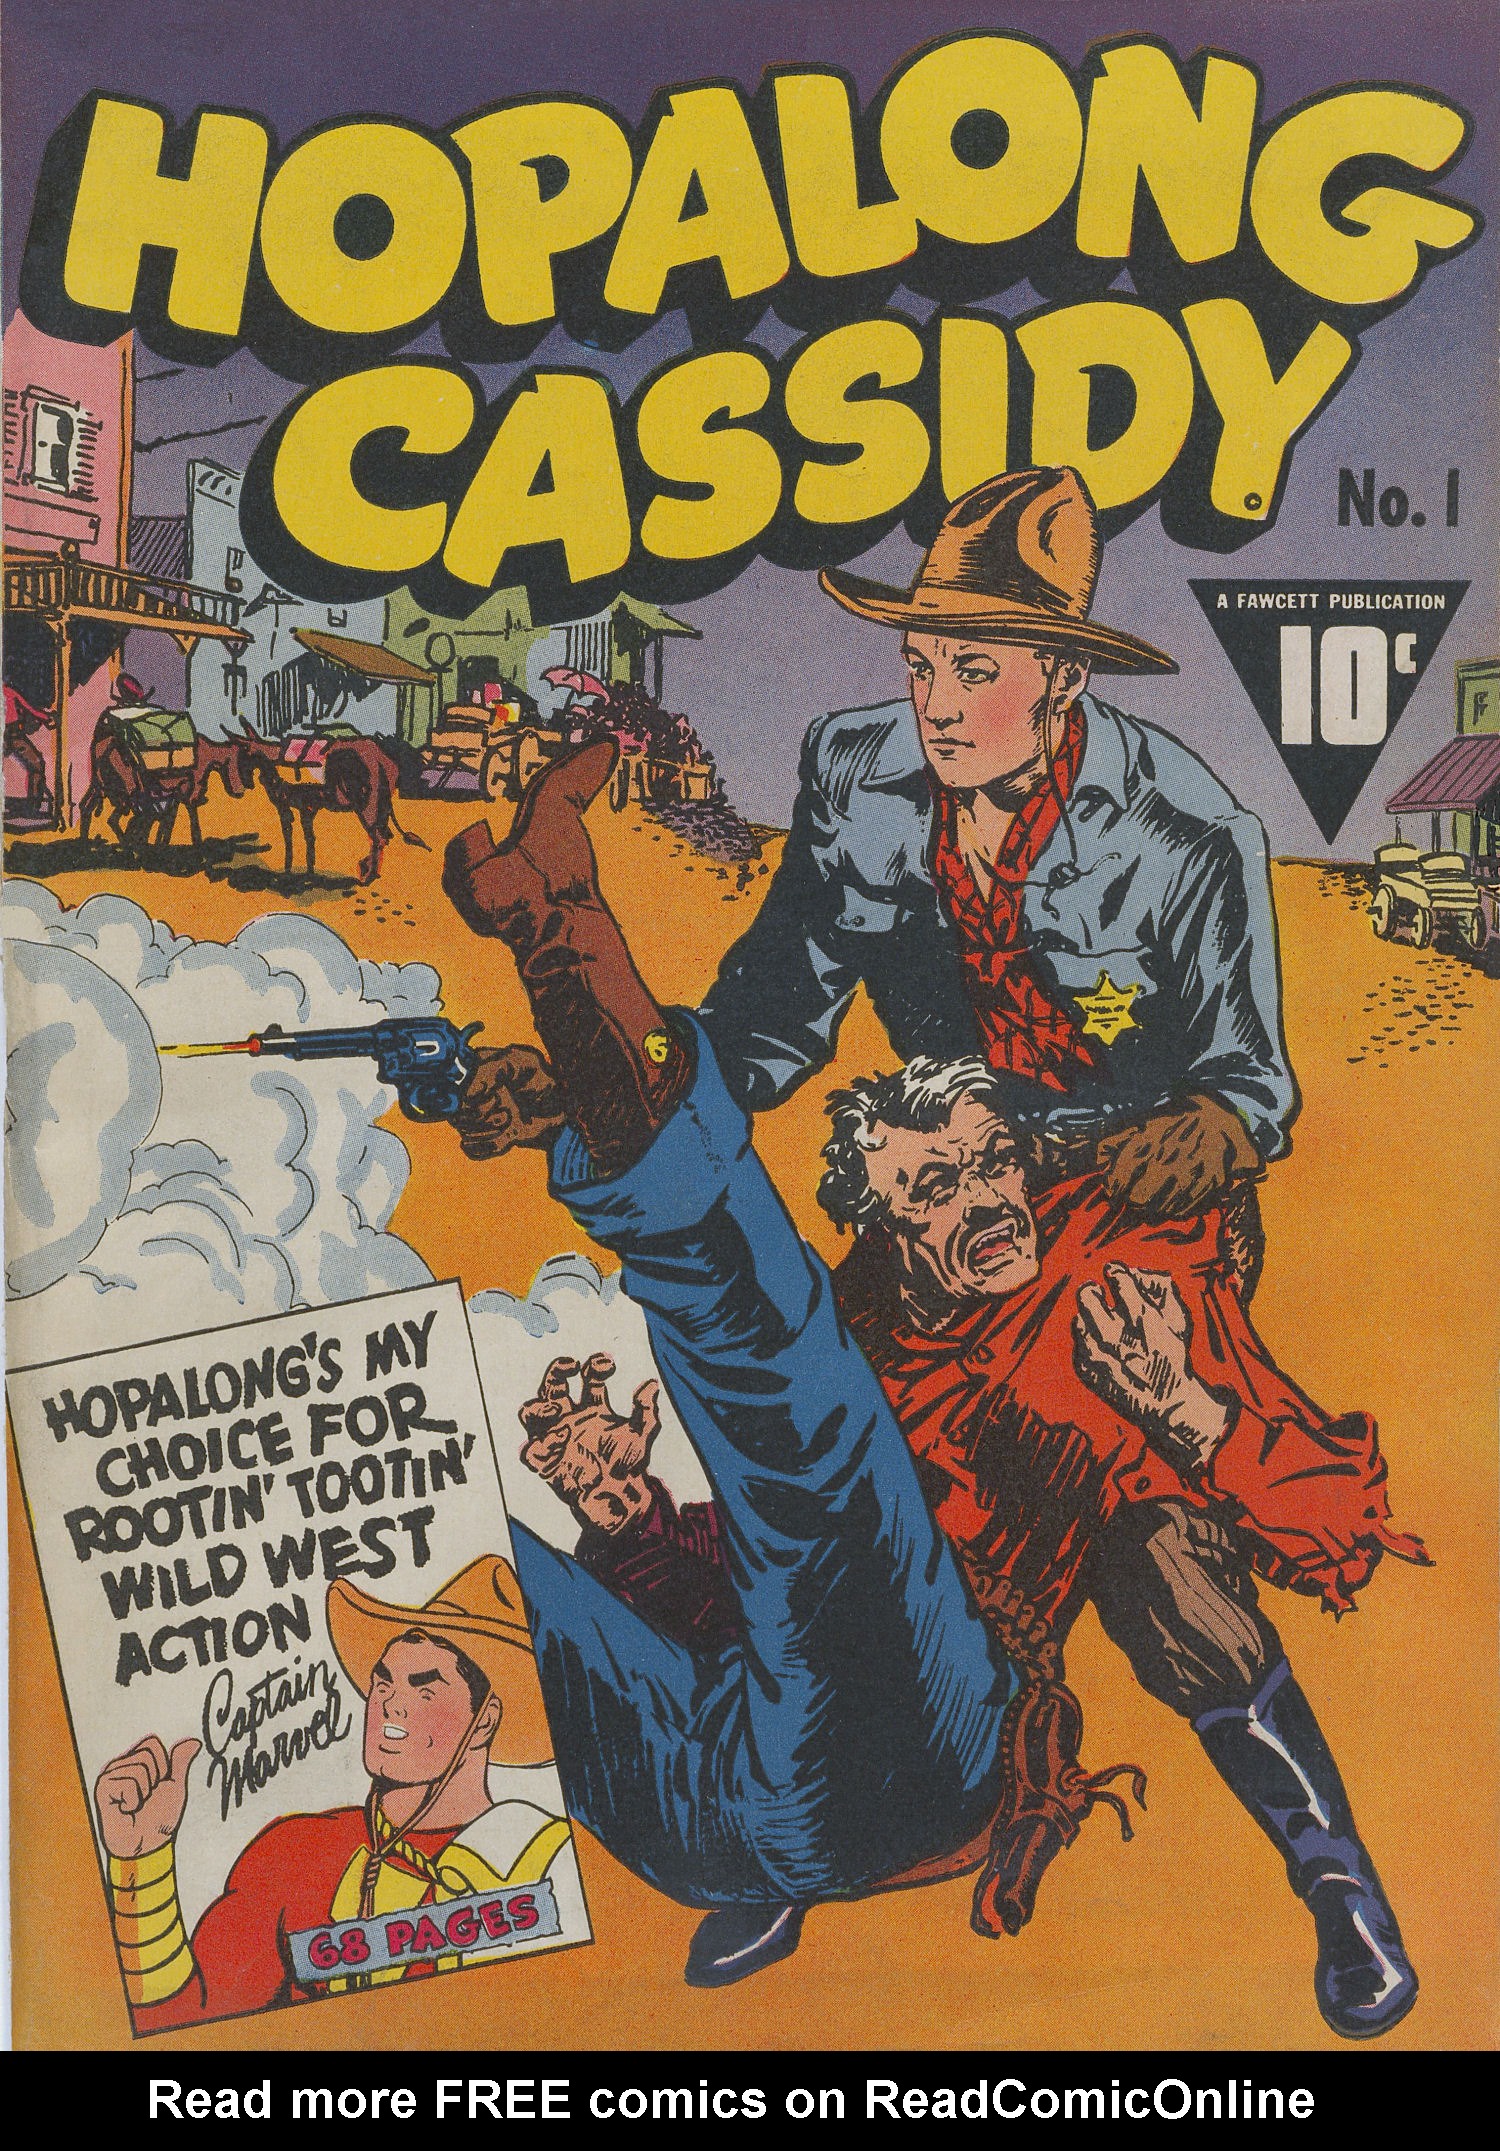 Read online Hopalong Cassidy comic -  Issue #1 - 1